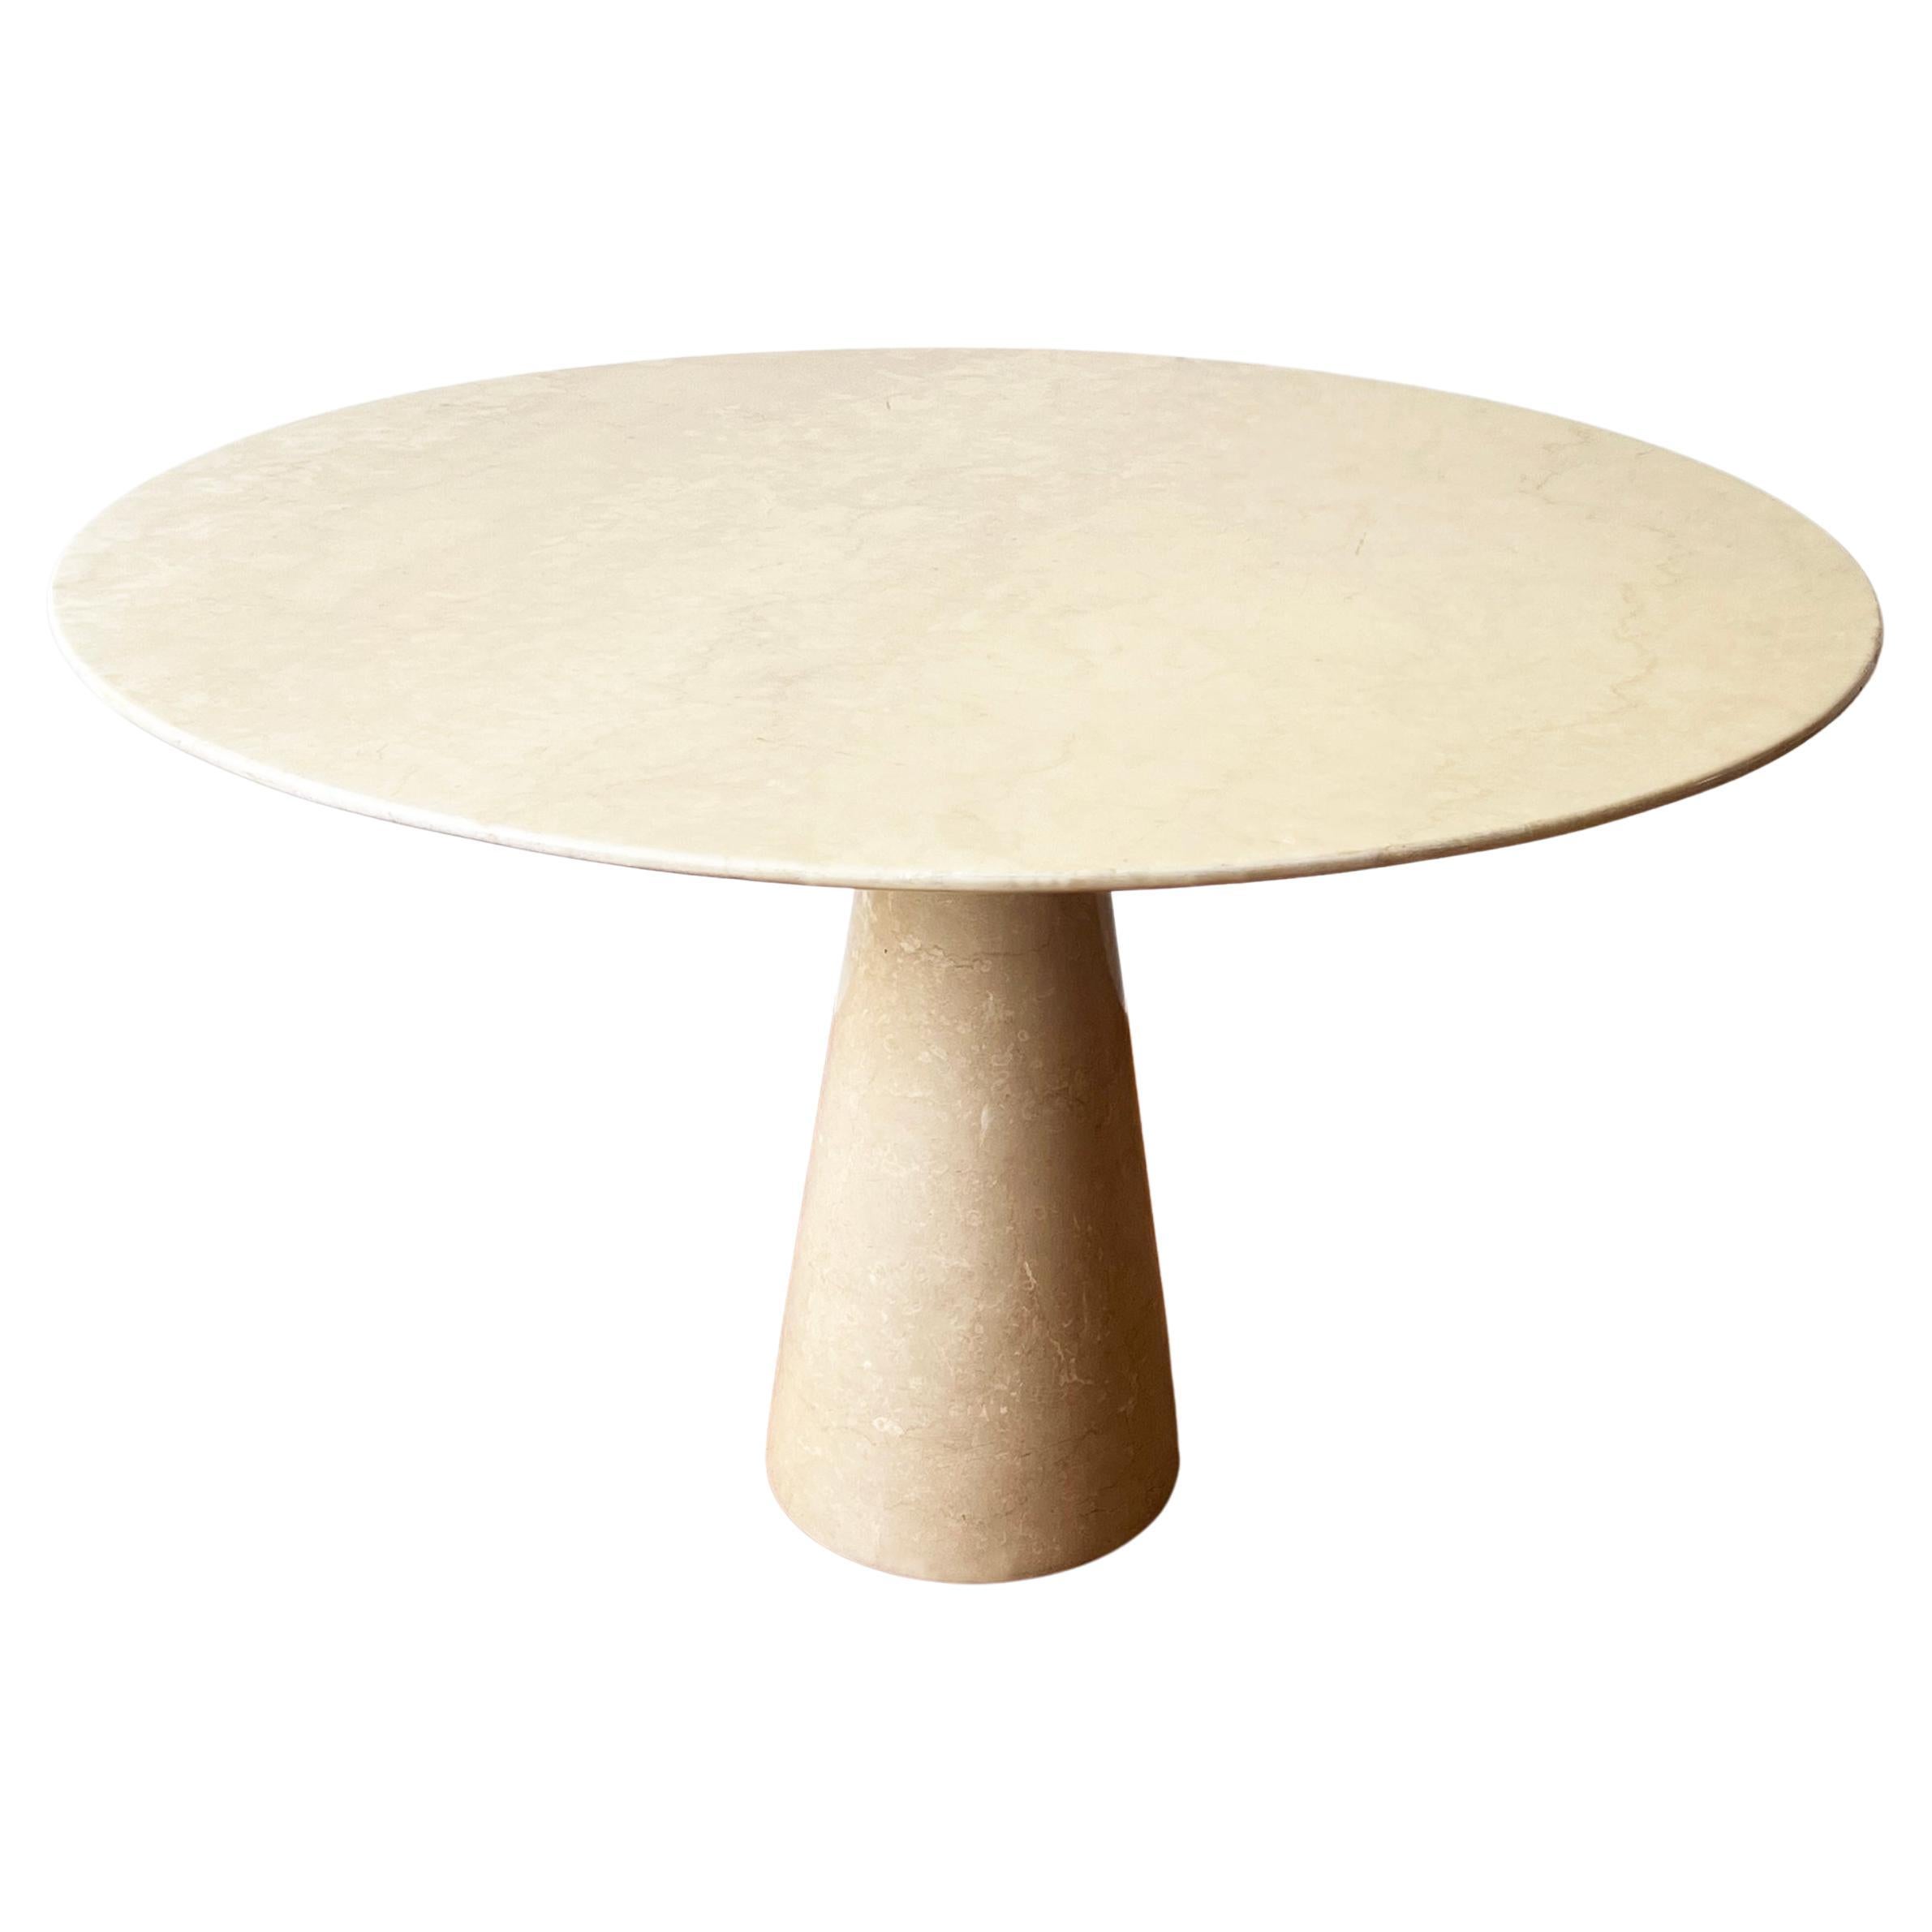 Postmodern Angelo Mangiarotti Cream Off White Marble Dining Table, Pedestal Base For Sale